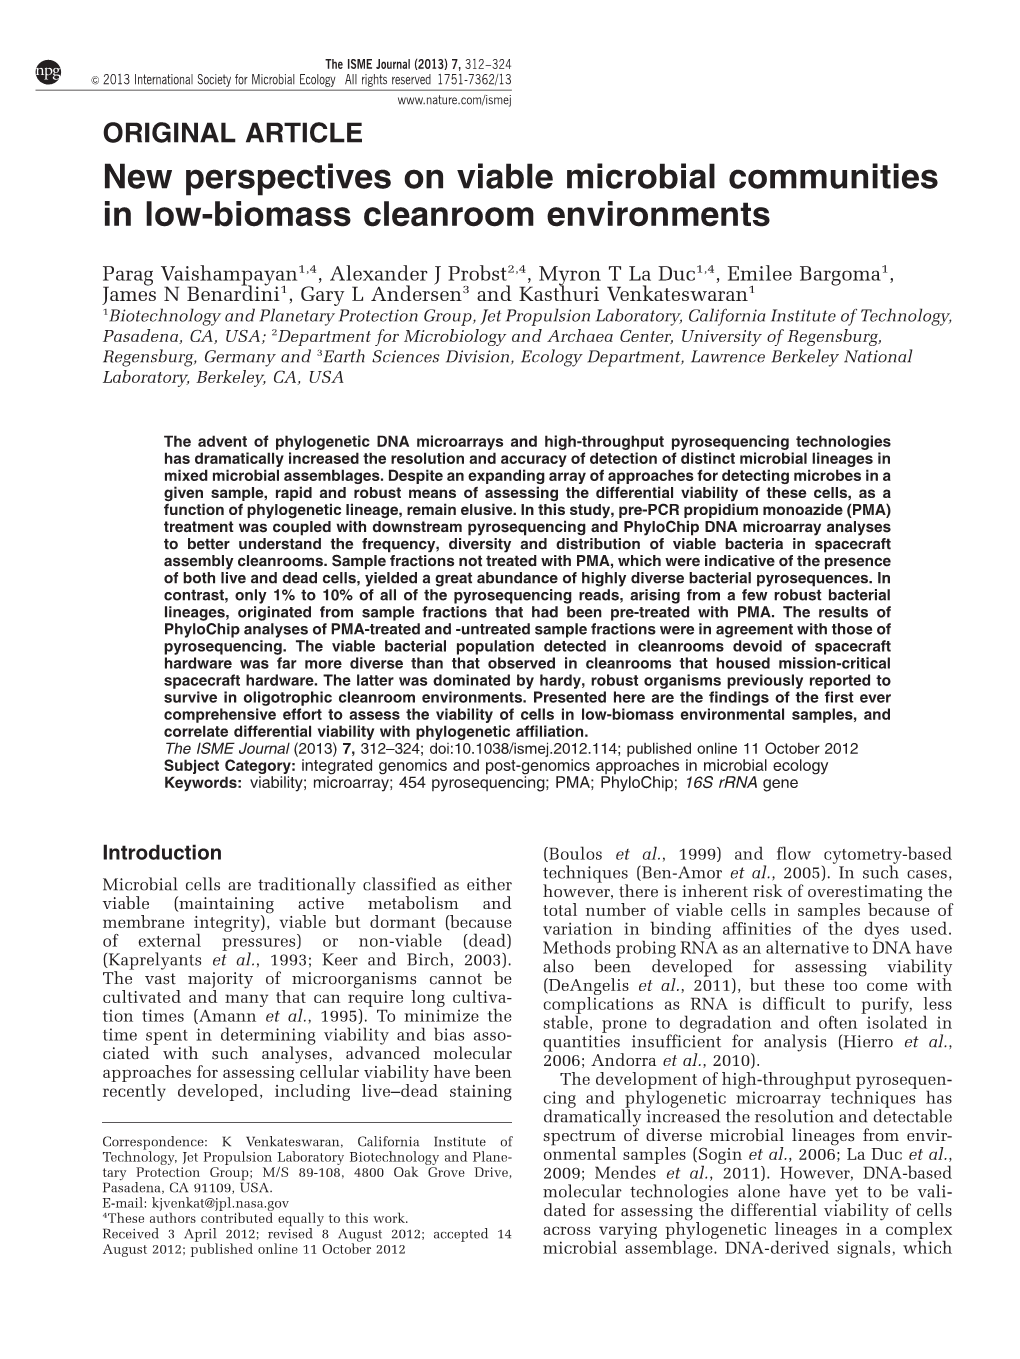 New Perspectives on Viable Microbial Communities in Low-Biomass Cleanroom Environments